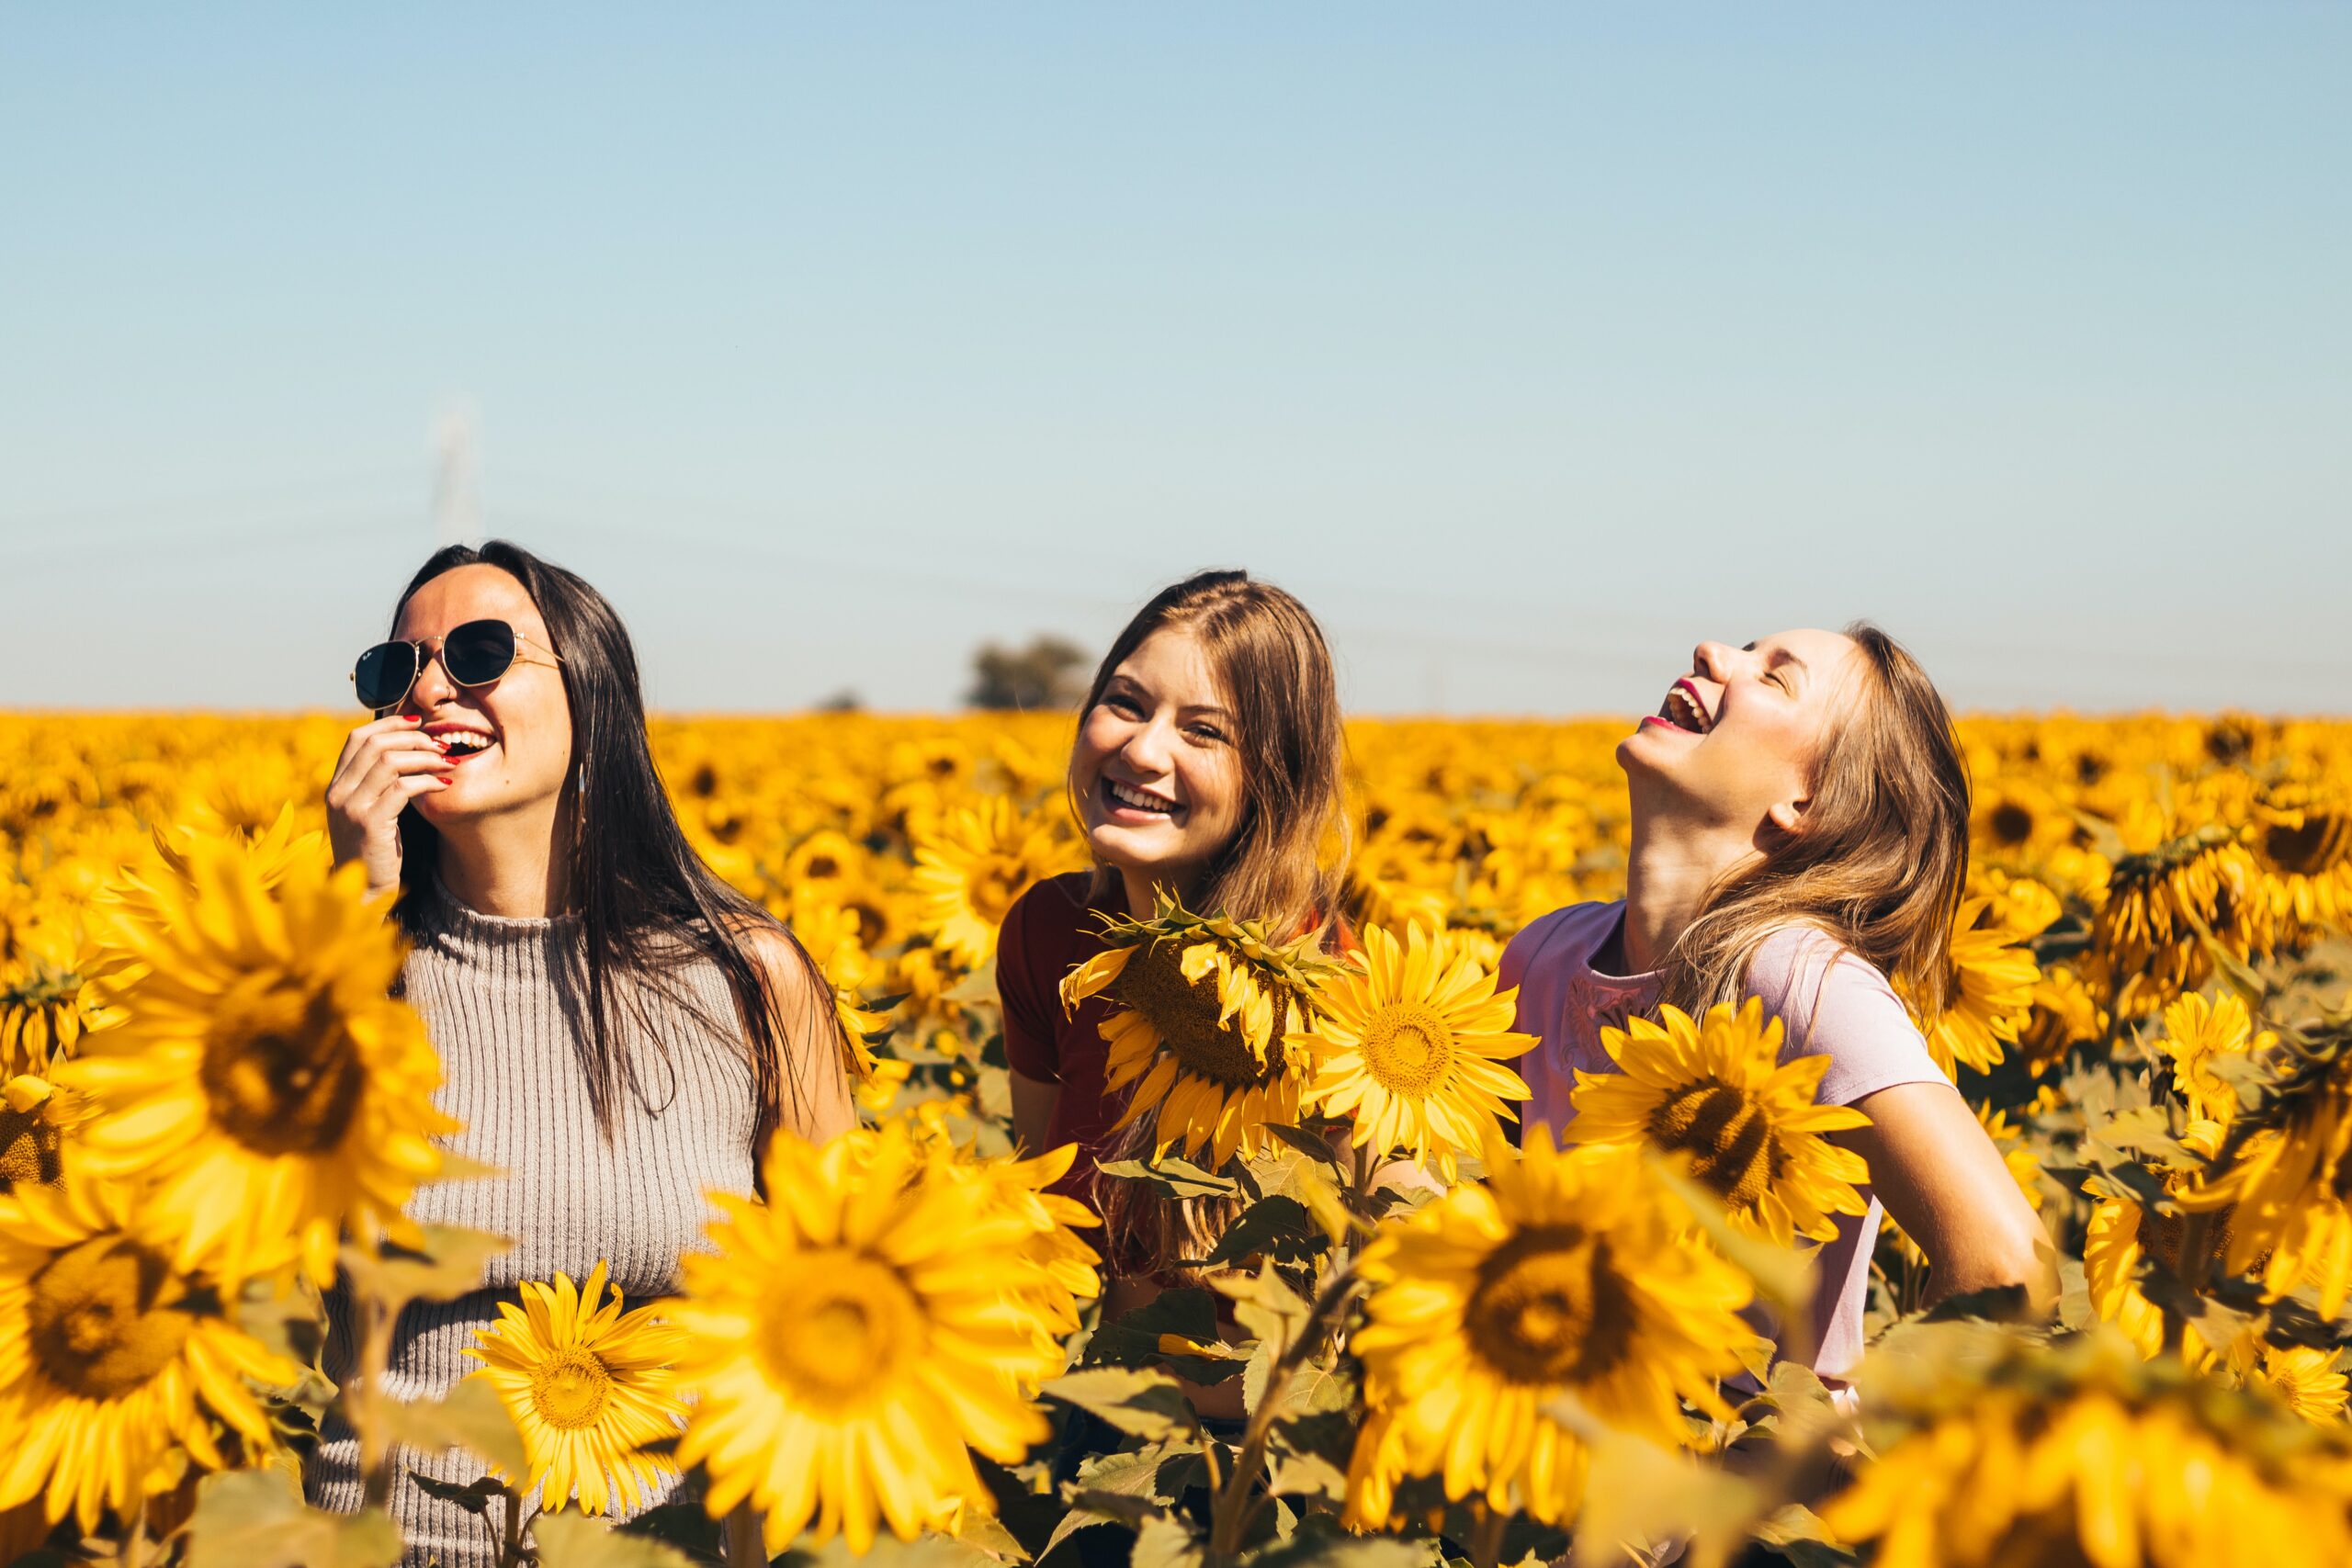 Three women with long hair laughing in a sea of sunflowers, sunny day, blue sky.